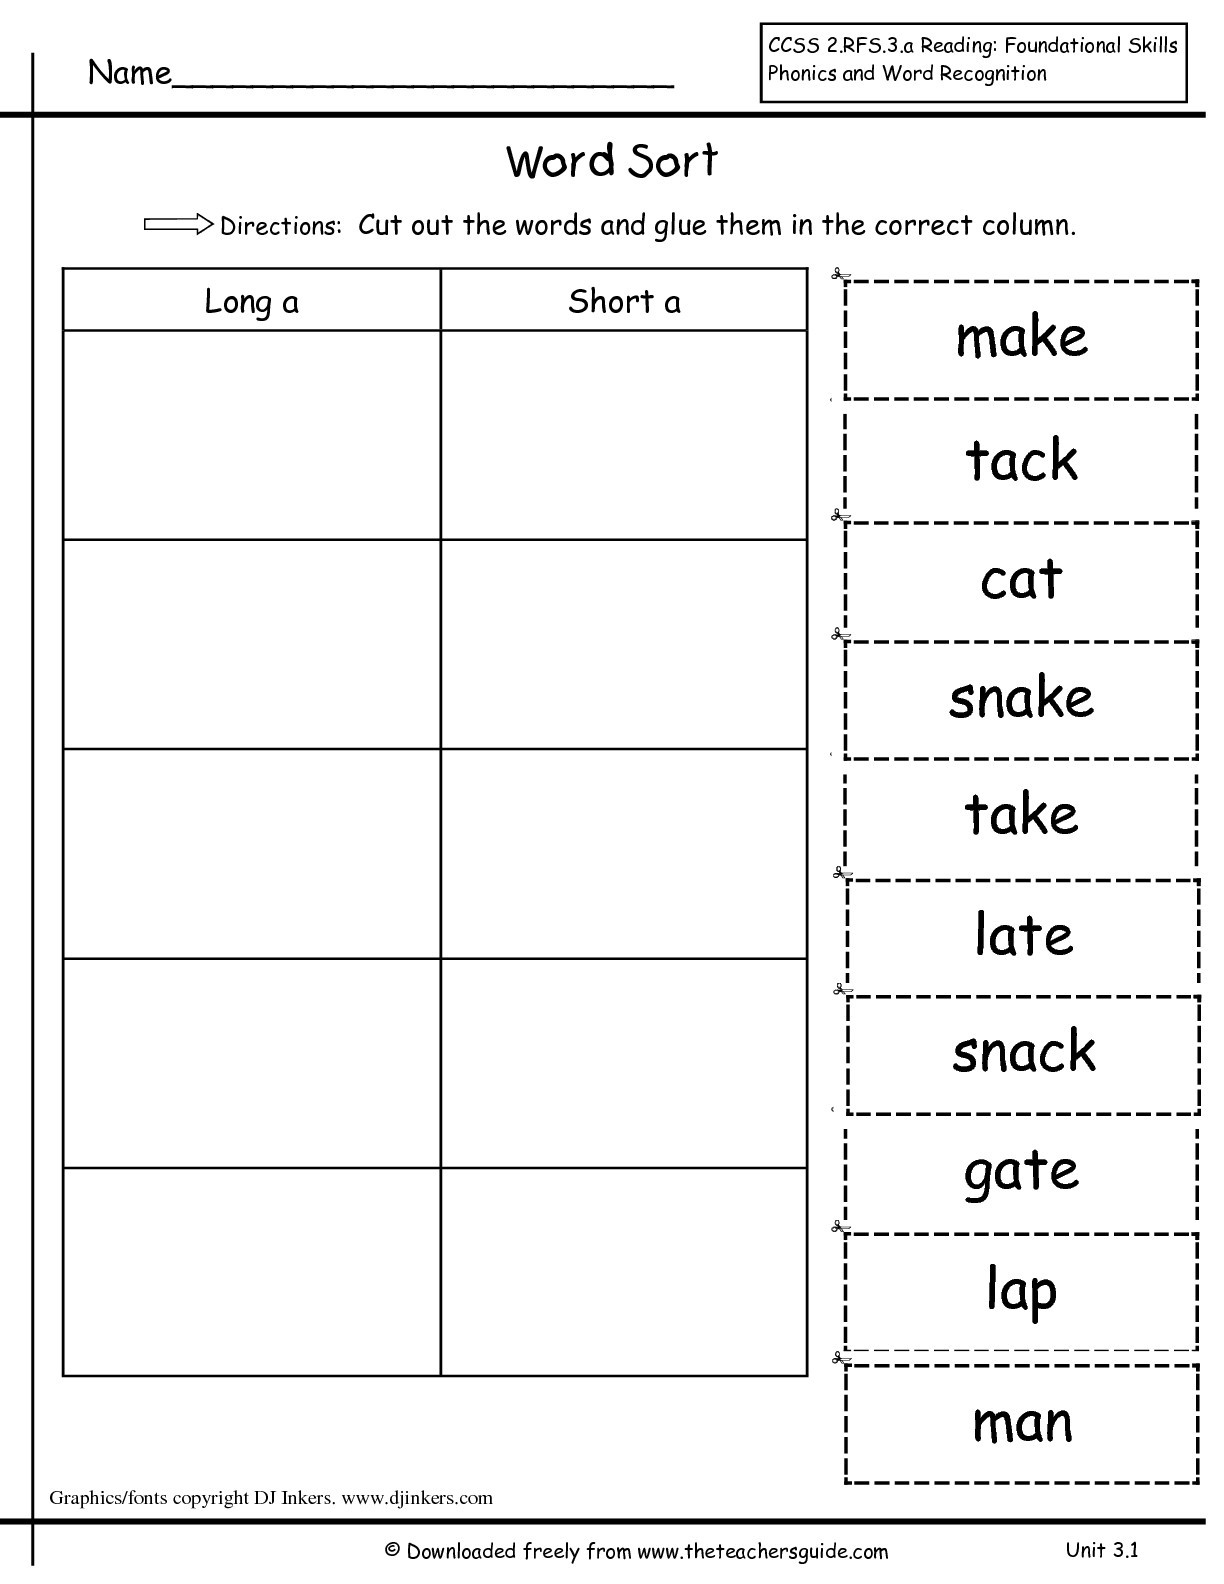 First Grade Spelling Words Worksheets Free Spelling Worksheets for First Grade ÙÙ ÙØ³Ø¨Ù ÙÙ ÙØ ÙÙ